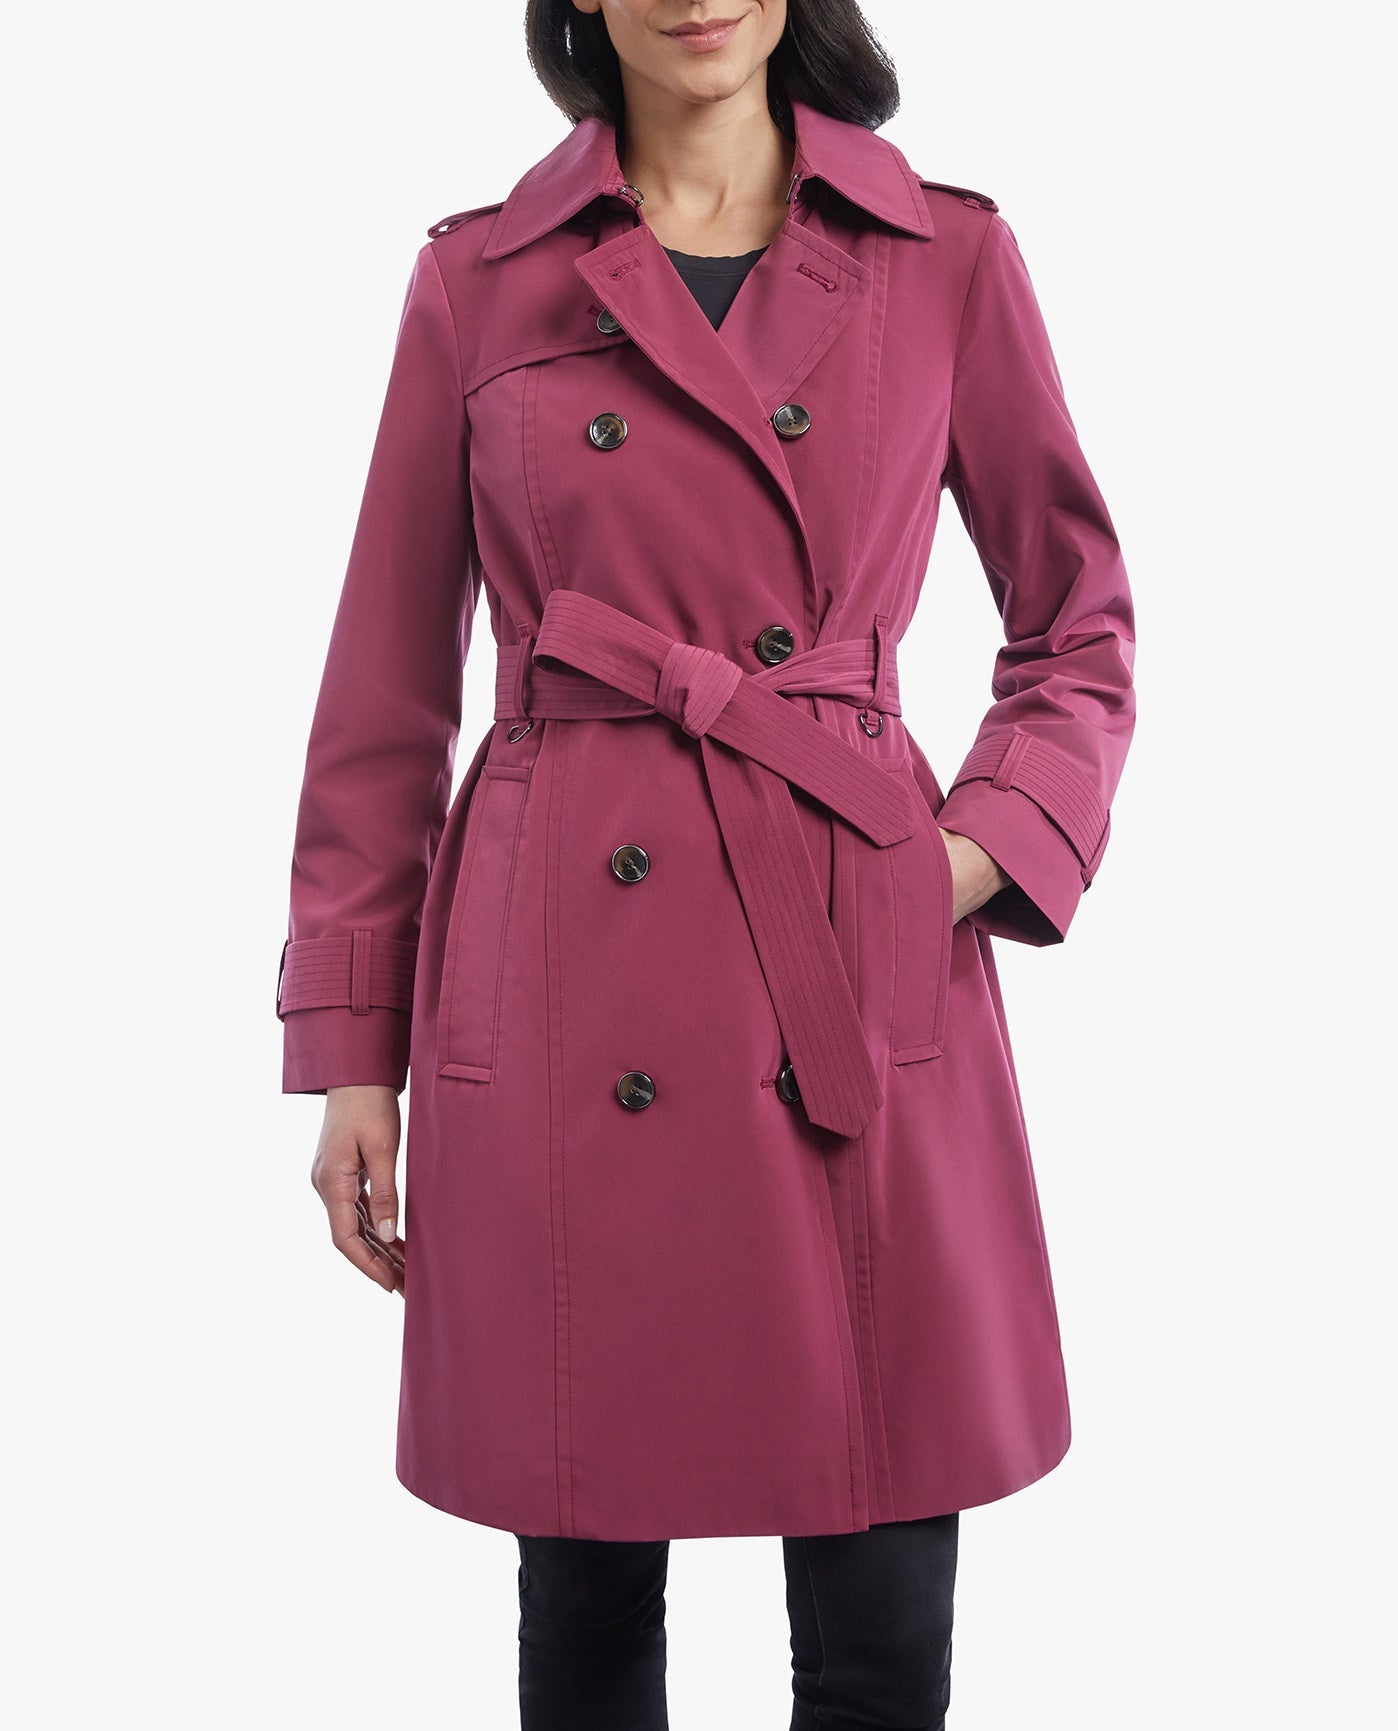 BACK OF  DOUBLE BREASTED BUTTON FRONT TRENCH WITH BELT | RHUBARB